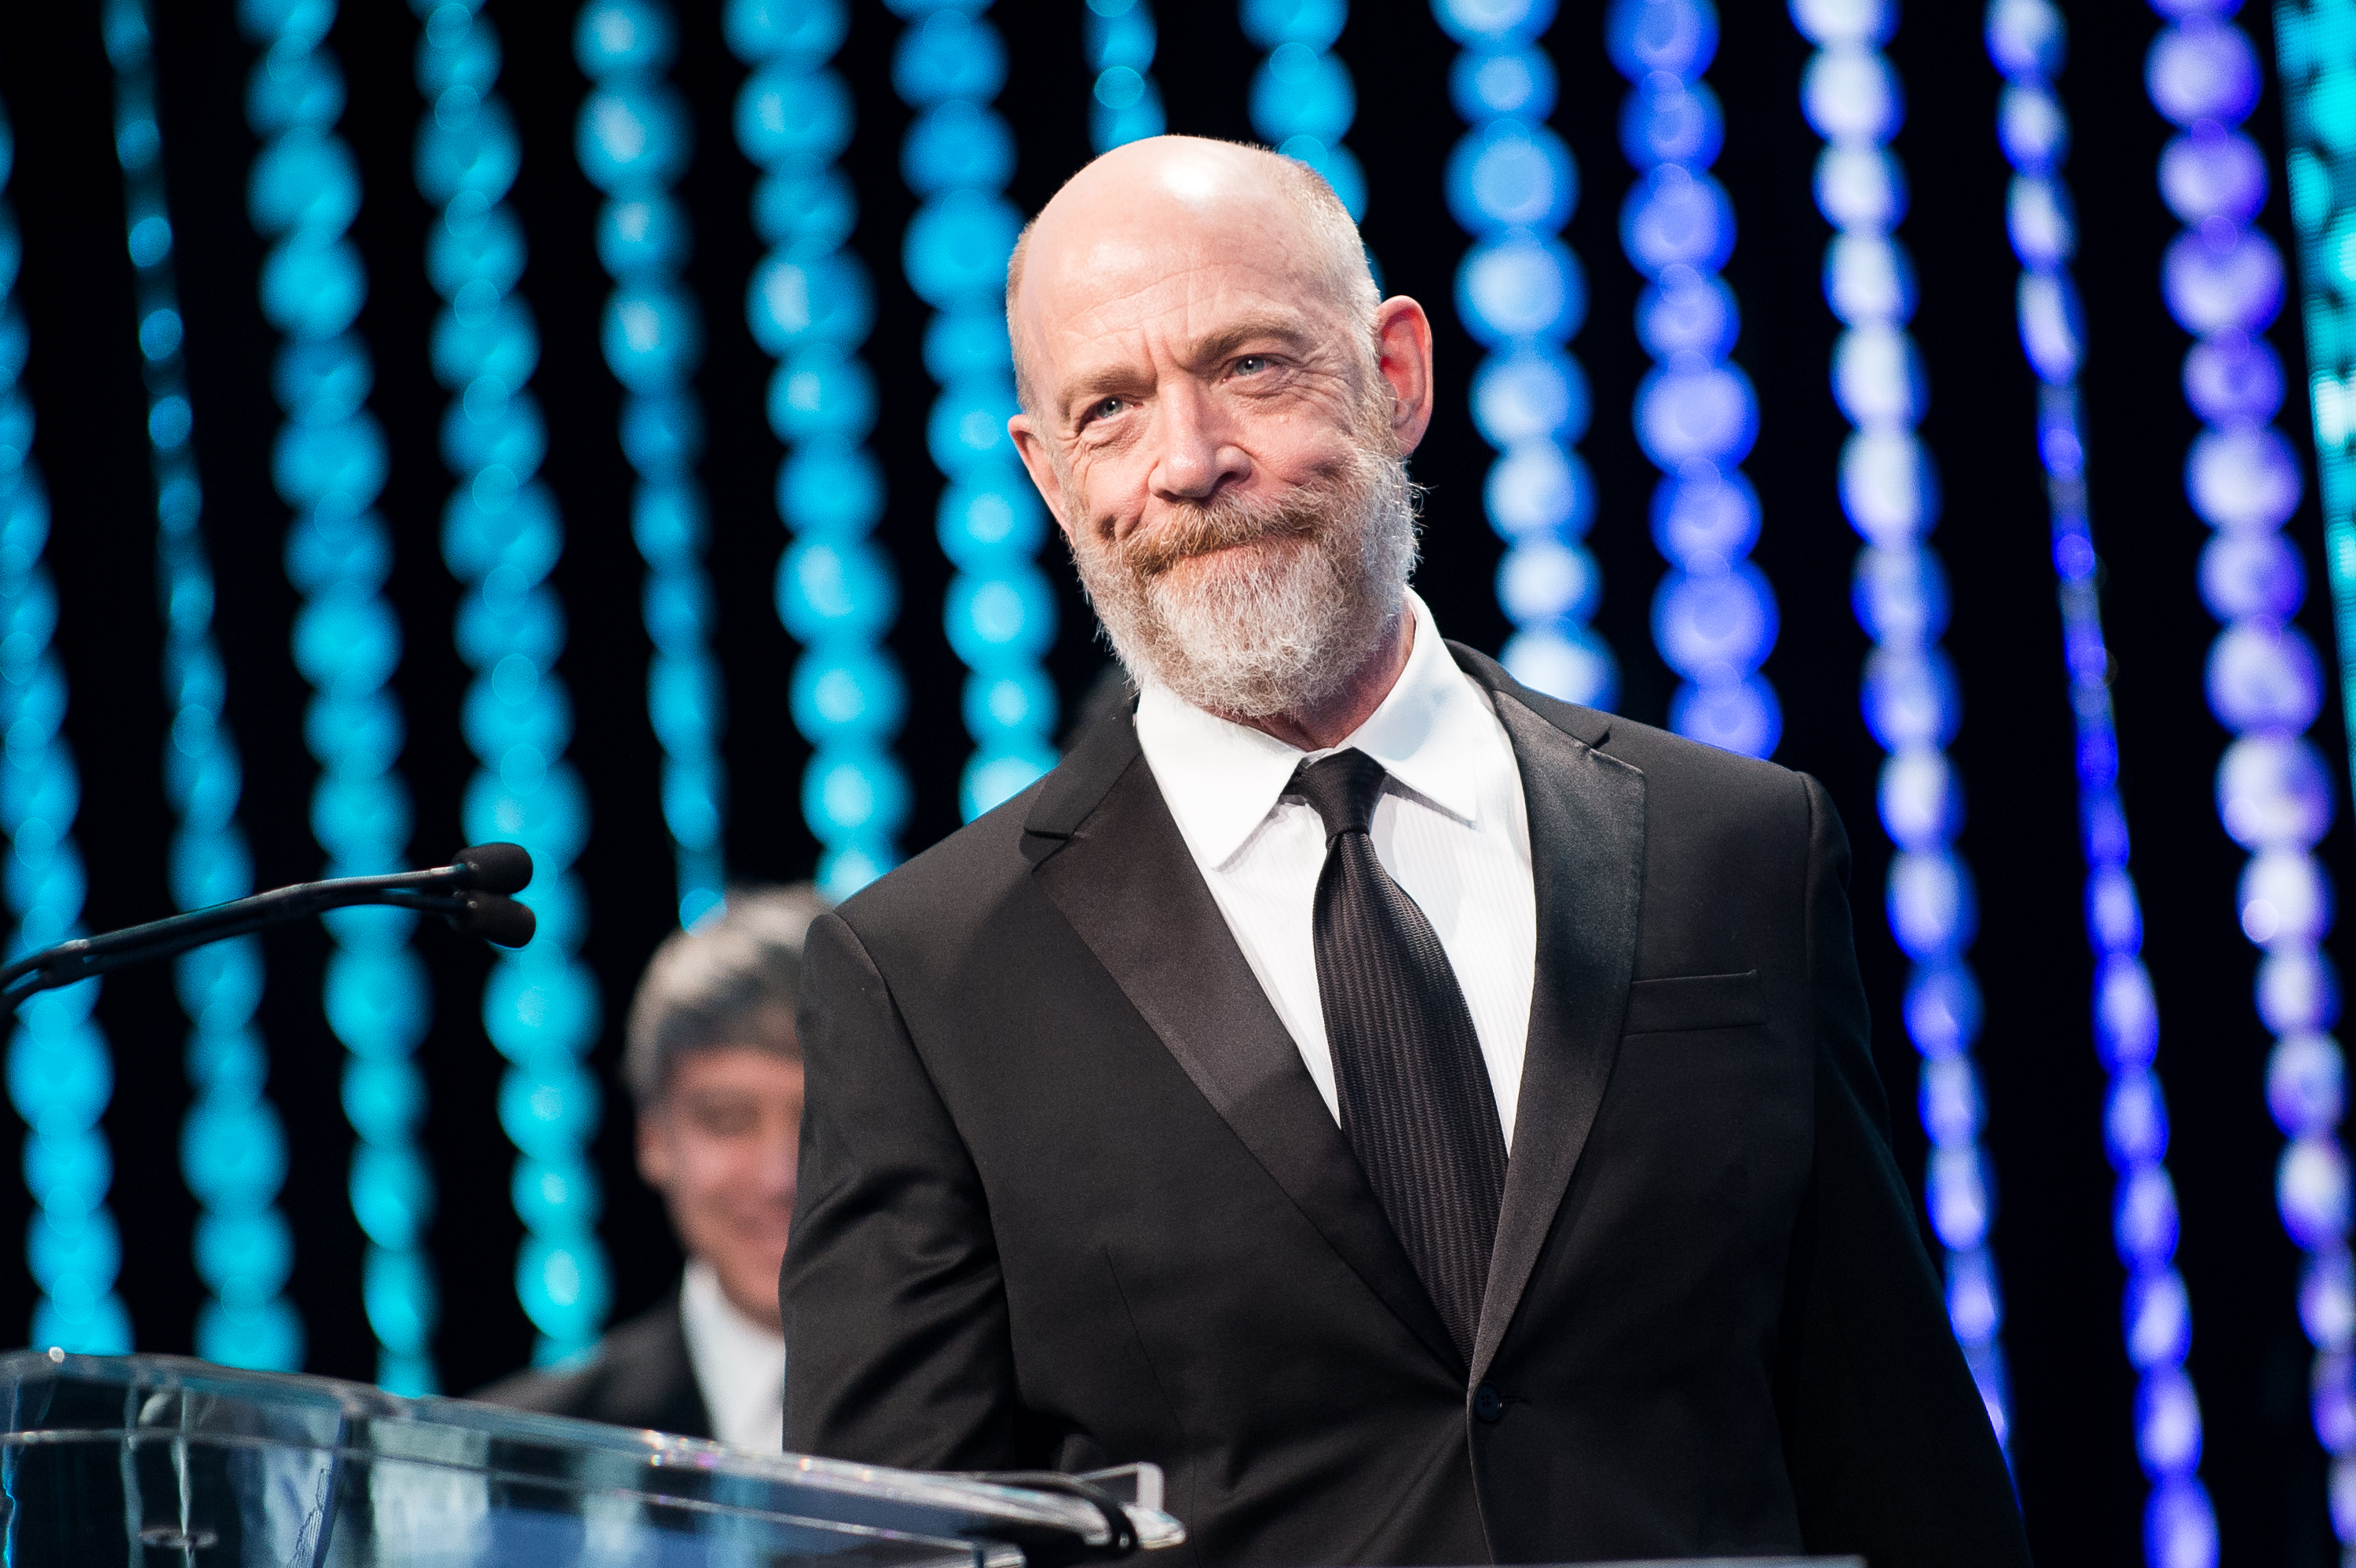 J.K. Simmons Joins The ‘Veronica Mars’ Revival As Ex-Con Clyde Prickett